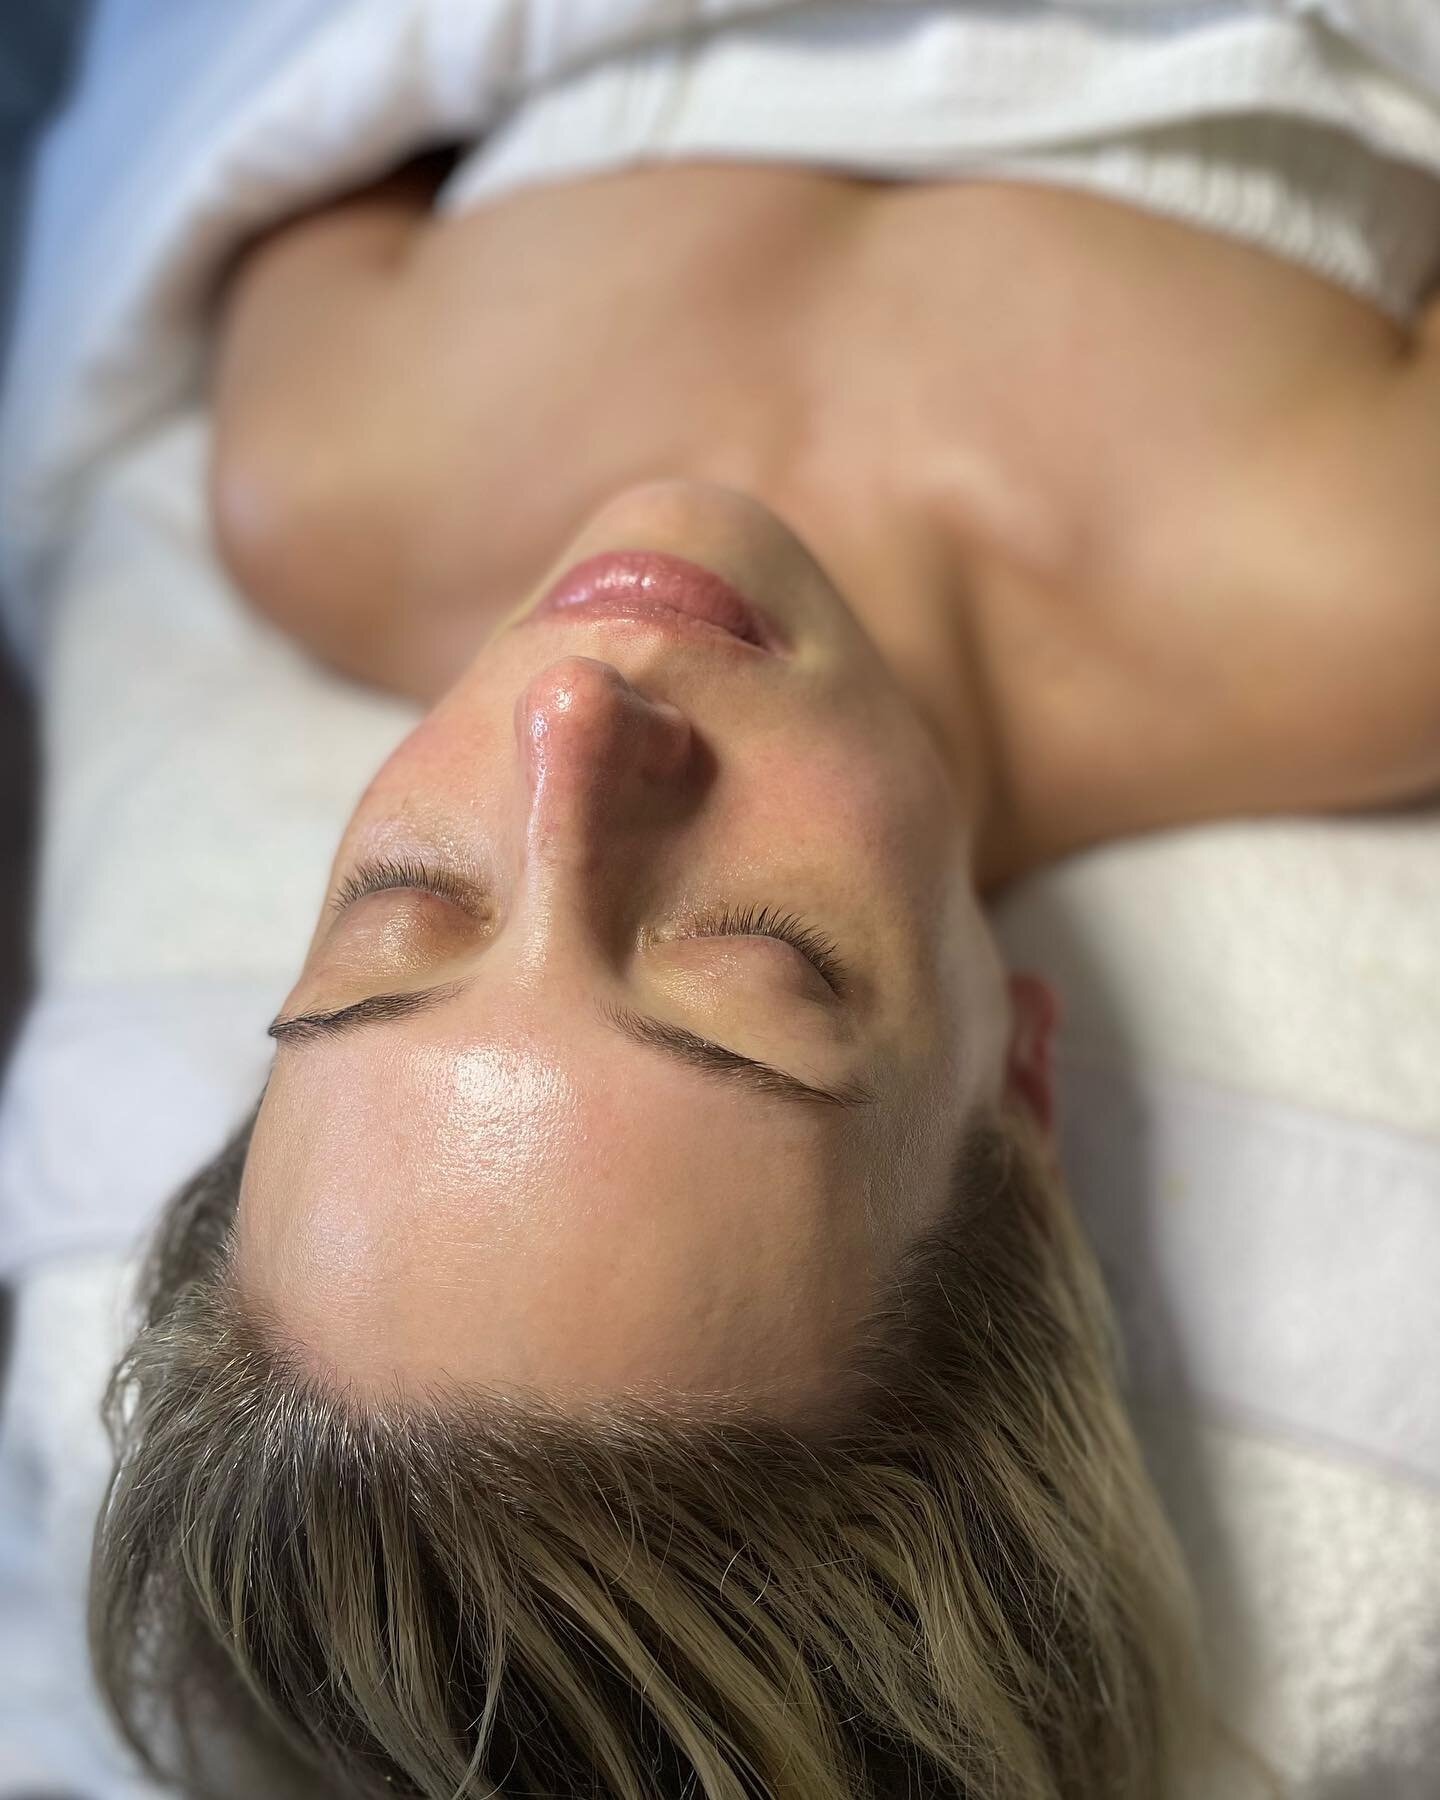 Not feeling yourself lately? ⁣
A facial can help that 💜⁣
⁣
Appointments available for October and on, get your skin on the right track by using the link in my bio to book! 
We do Dermaplane + Hydrafacial to keep her beautiful youthful complexion🤩
⁣